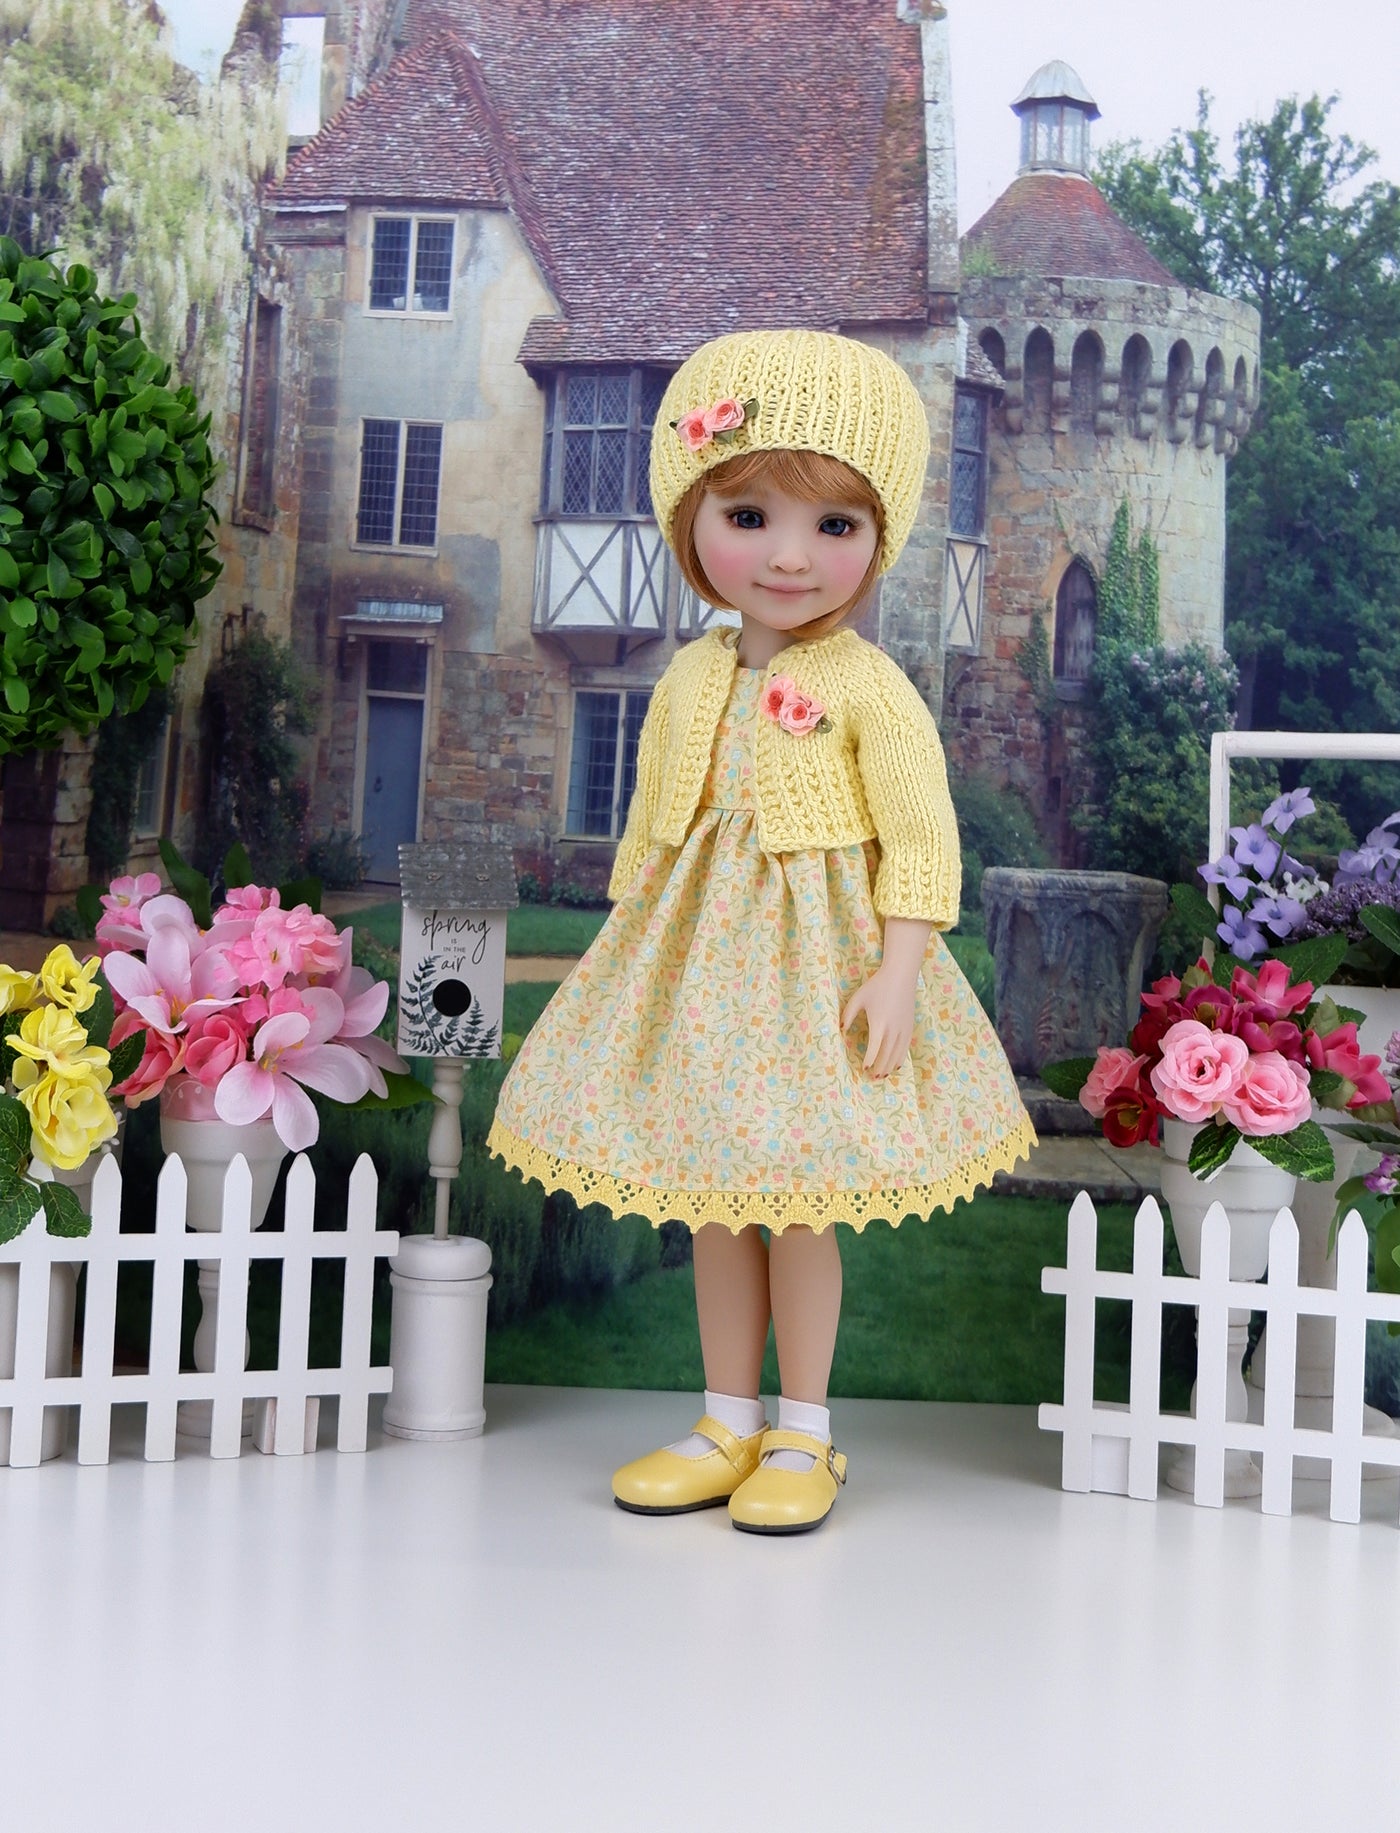 Bit of Spring - dress and sweater set with shoes for Ruby Red Fashion Friends doll